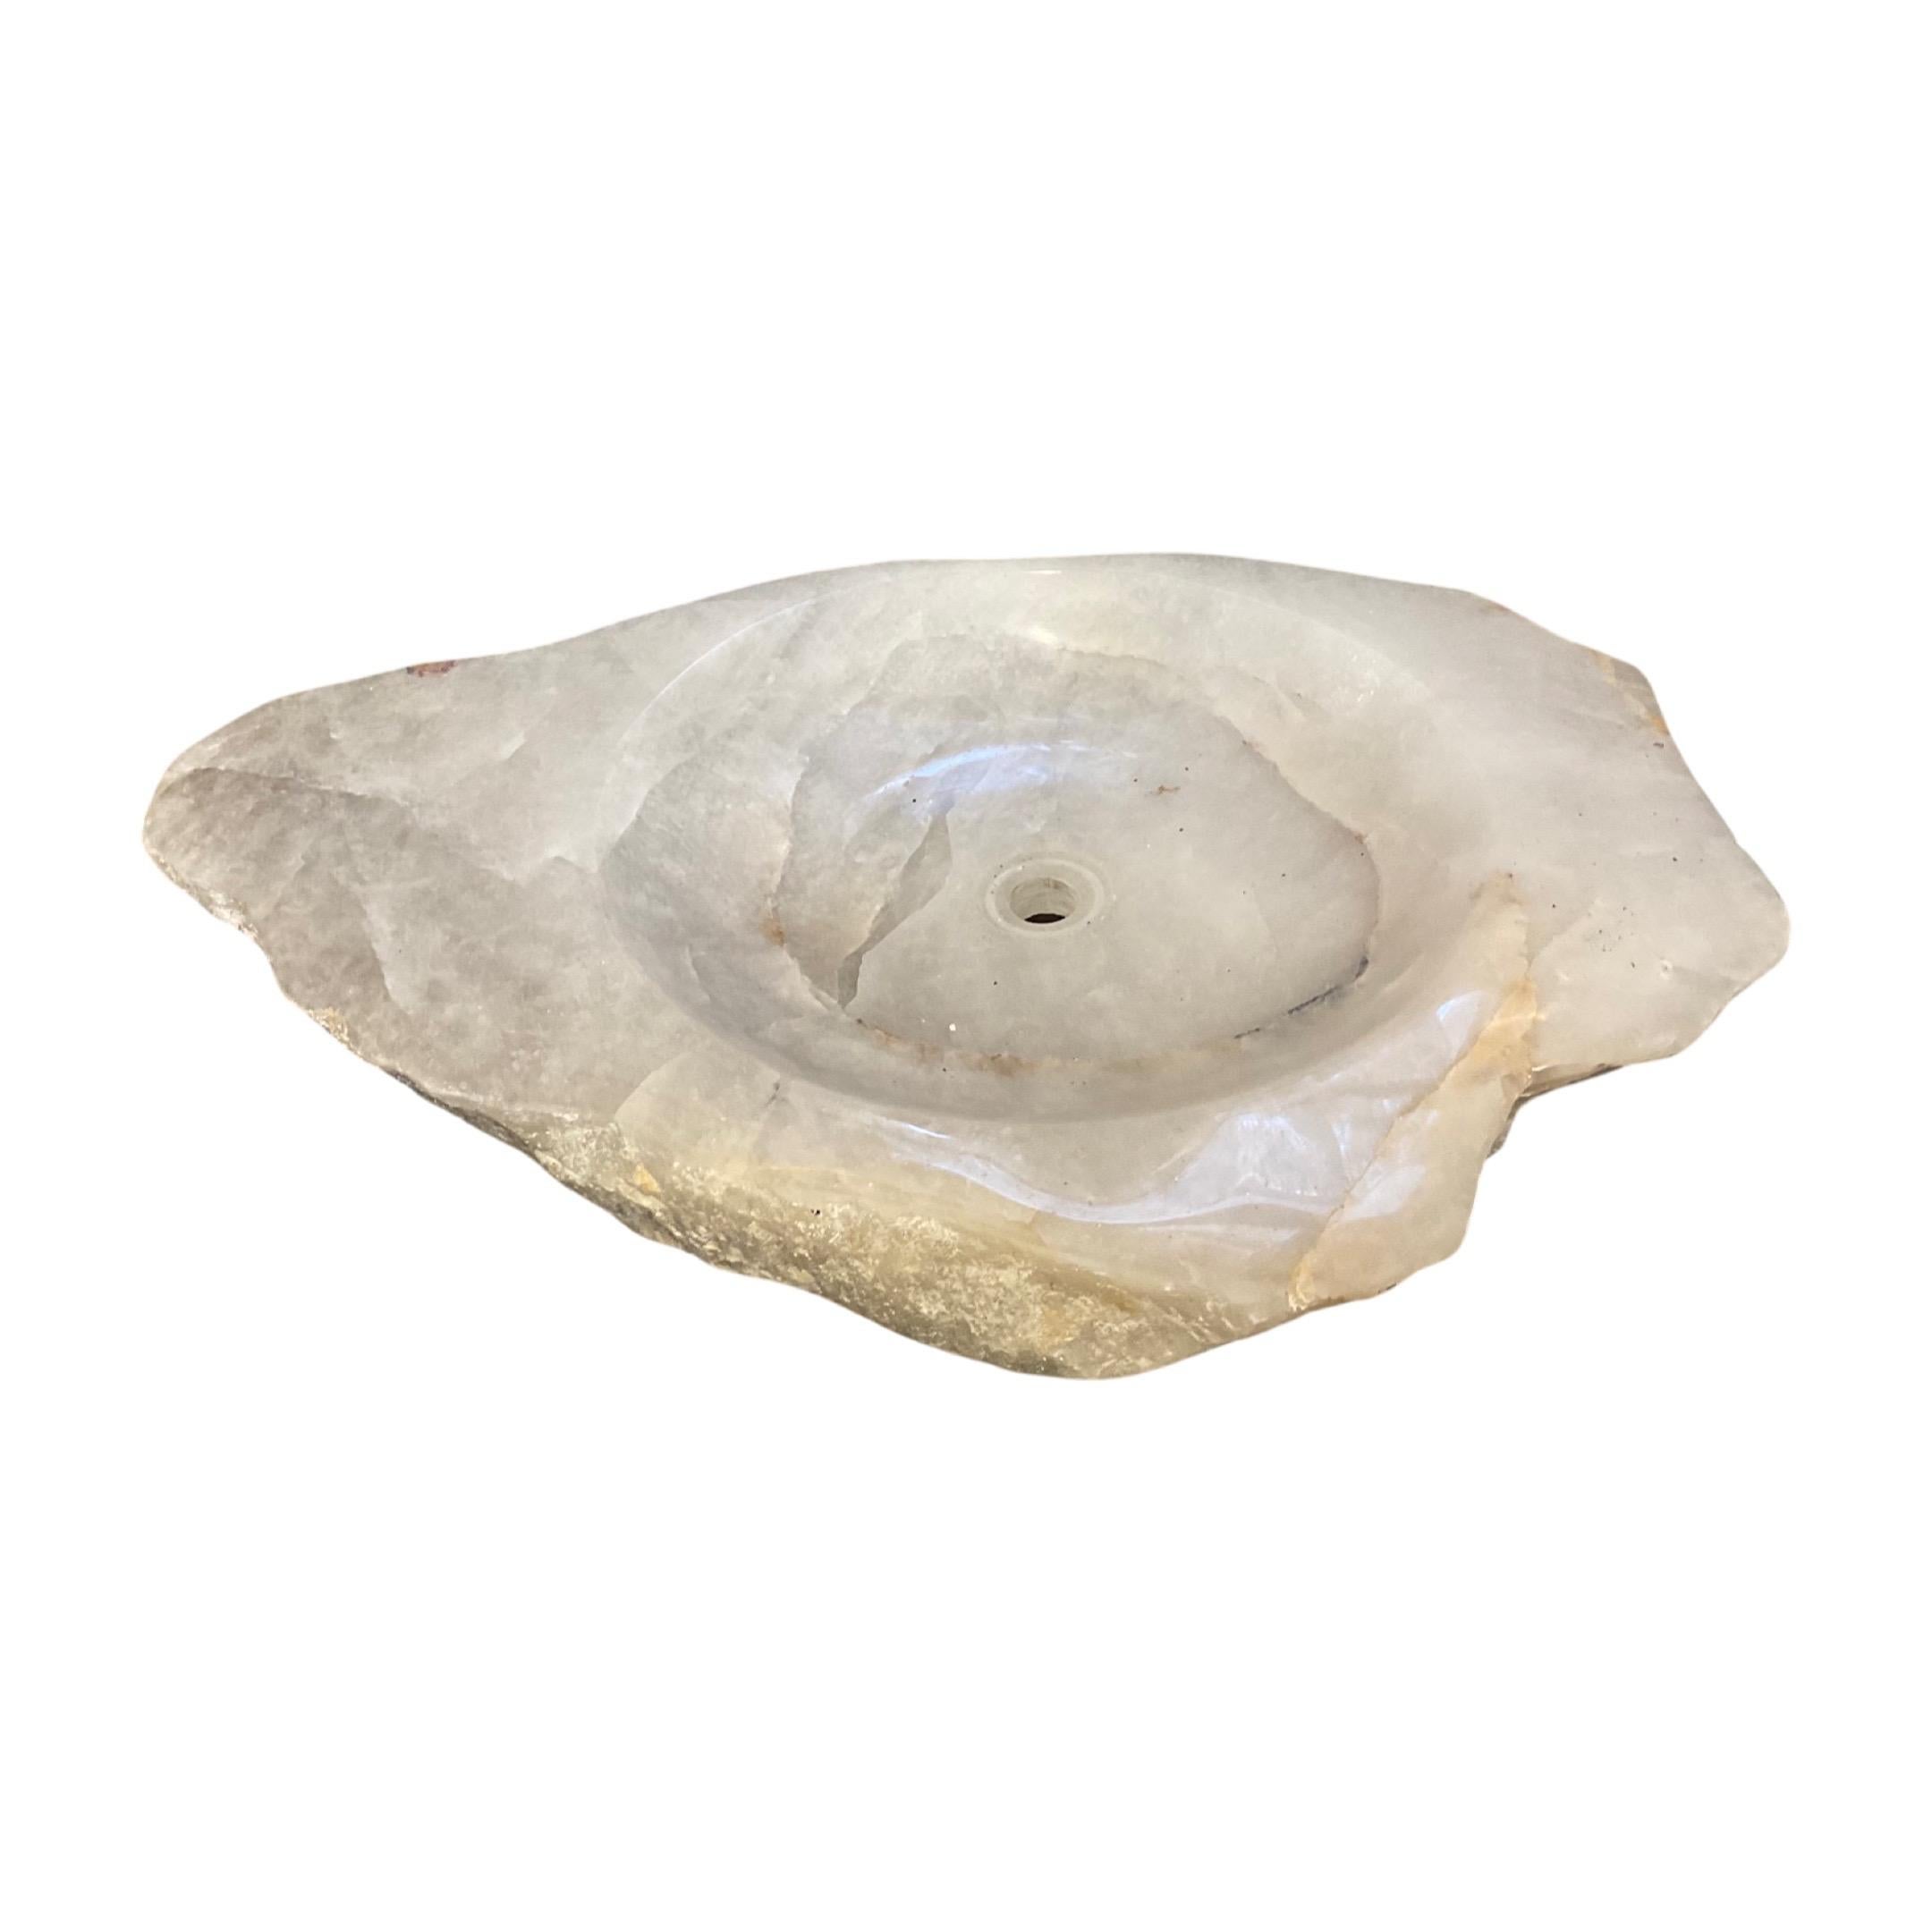 This Brazilian rock crystal sink bowl is crafted from natural quartz, providing a stunning, modern look. Its smooth, glossy surface is durable and easy to clean, making this an ideal choice for any bathroom or kitchen. This natural quartz sink bowl